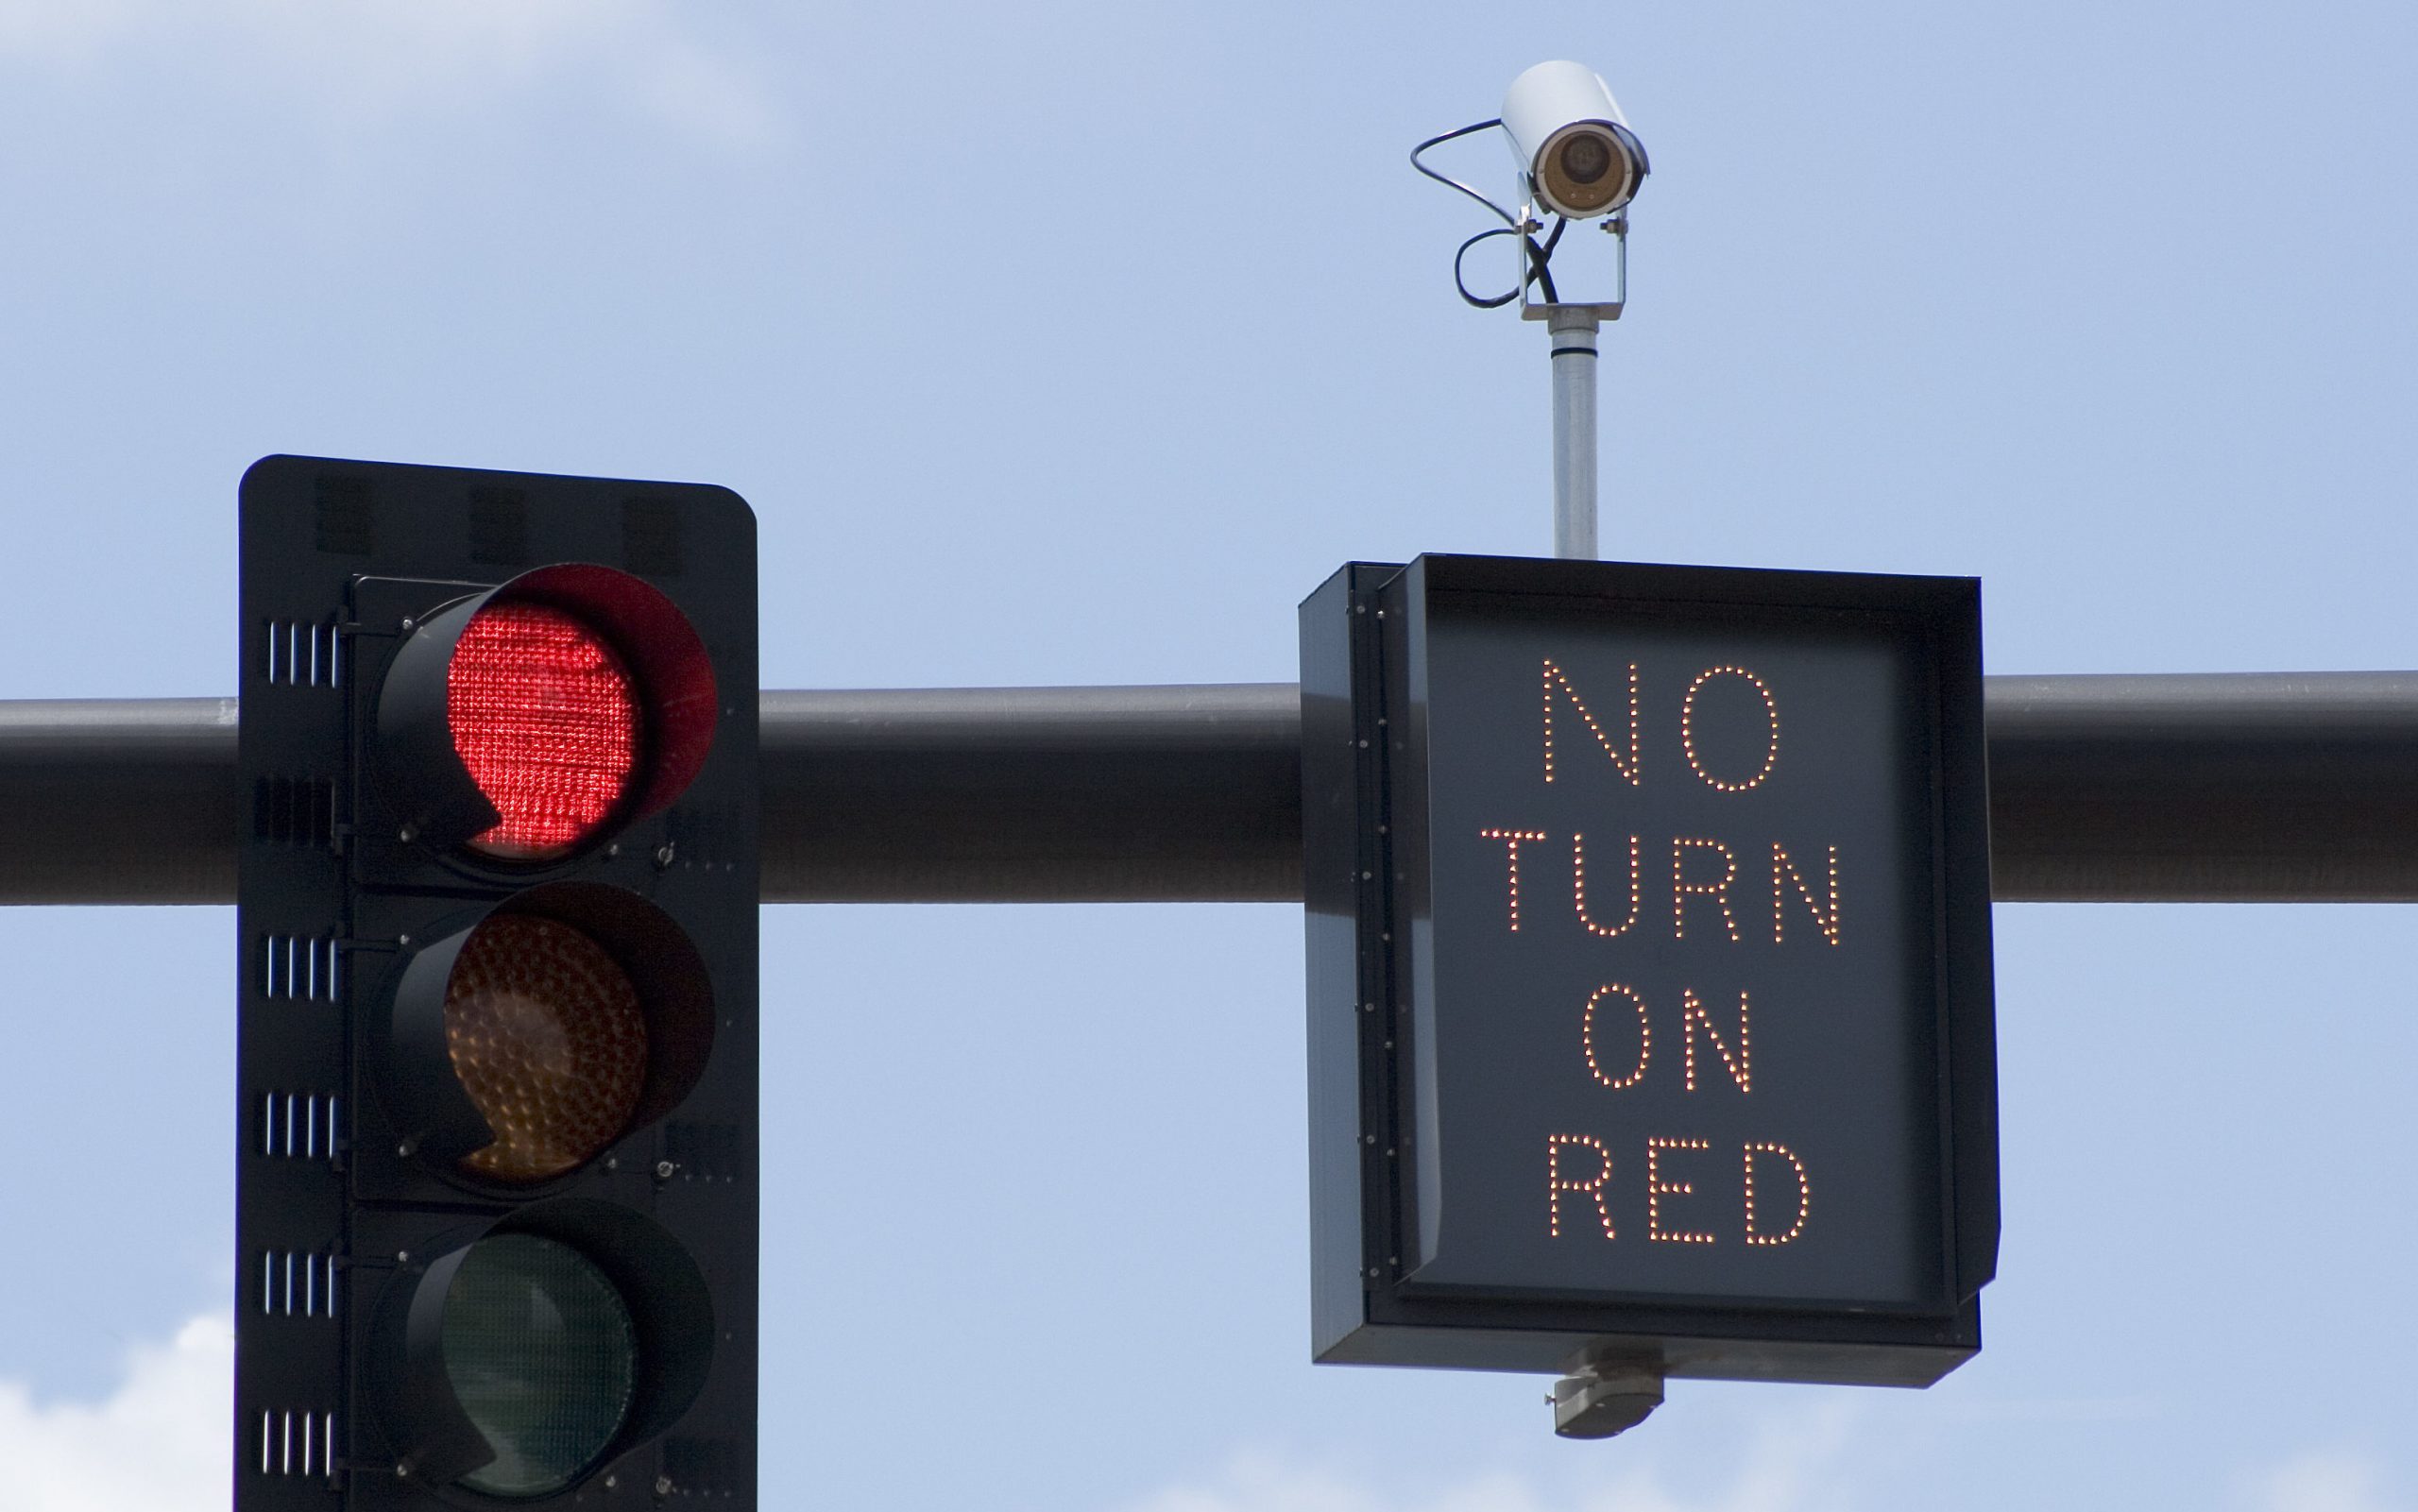 How Do You Know If a Red Light Camera Caught You?